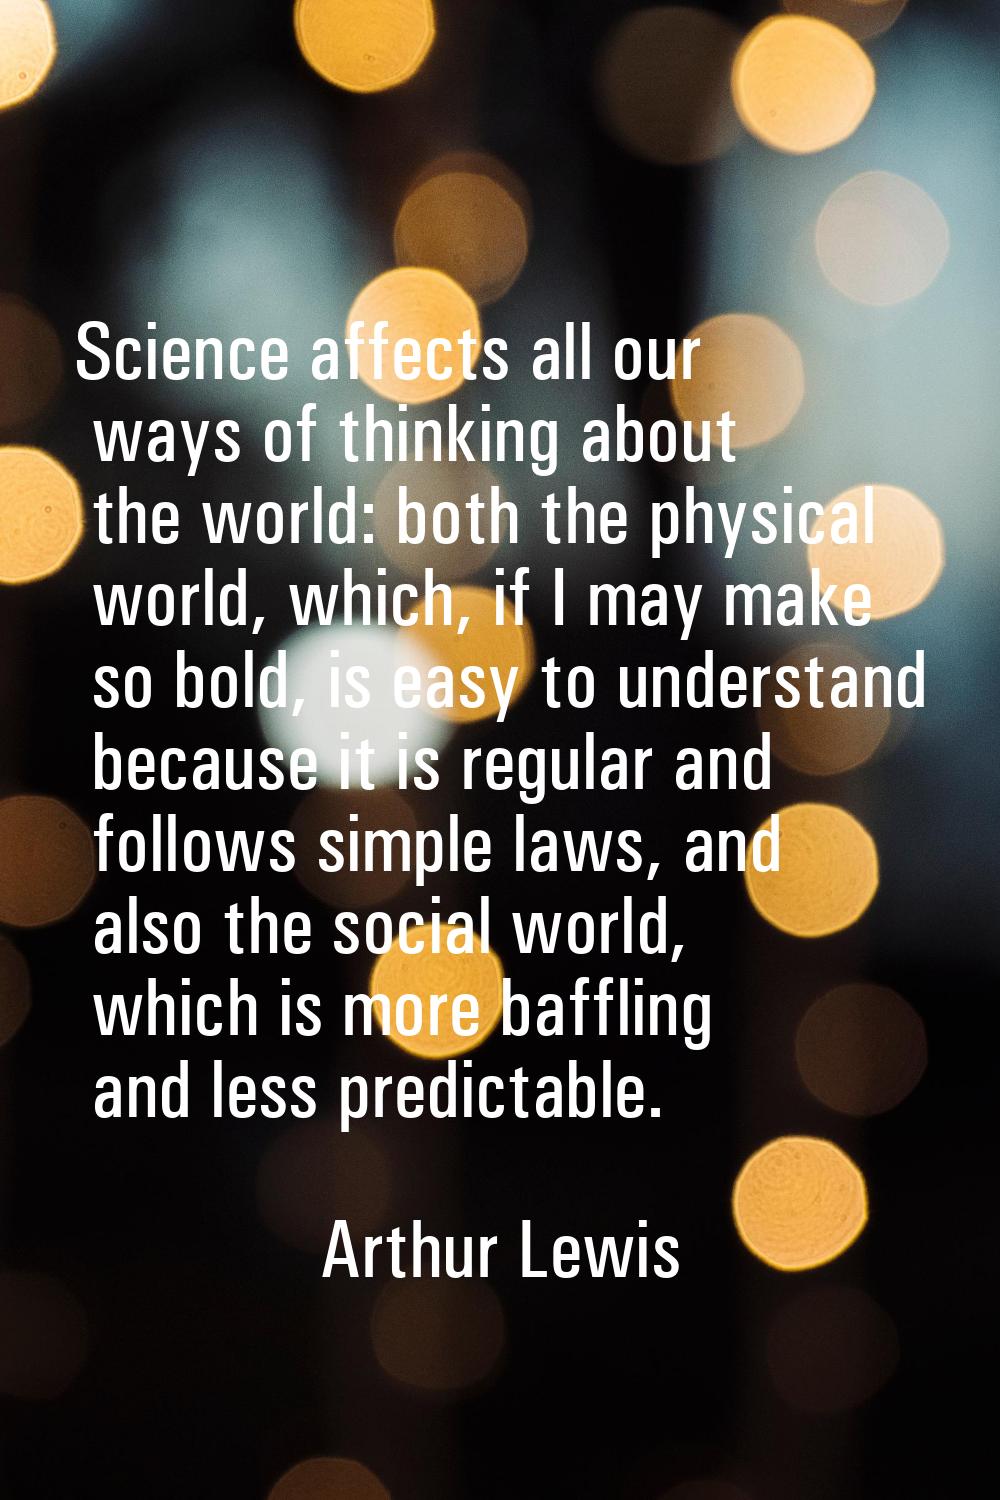 Science affects all our ways of thinking about the world: both the physical world, which, if I may 